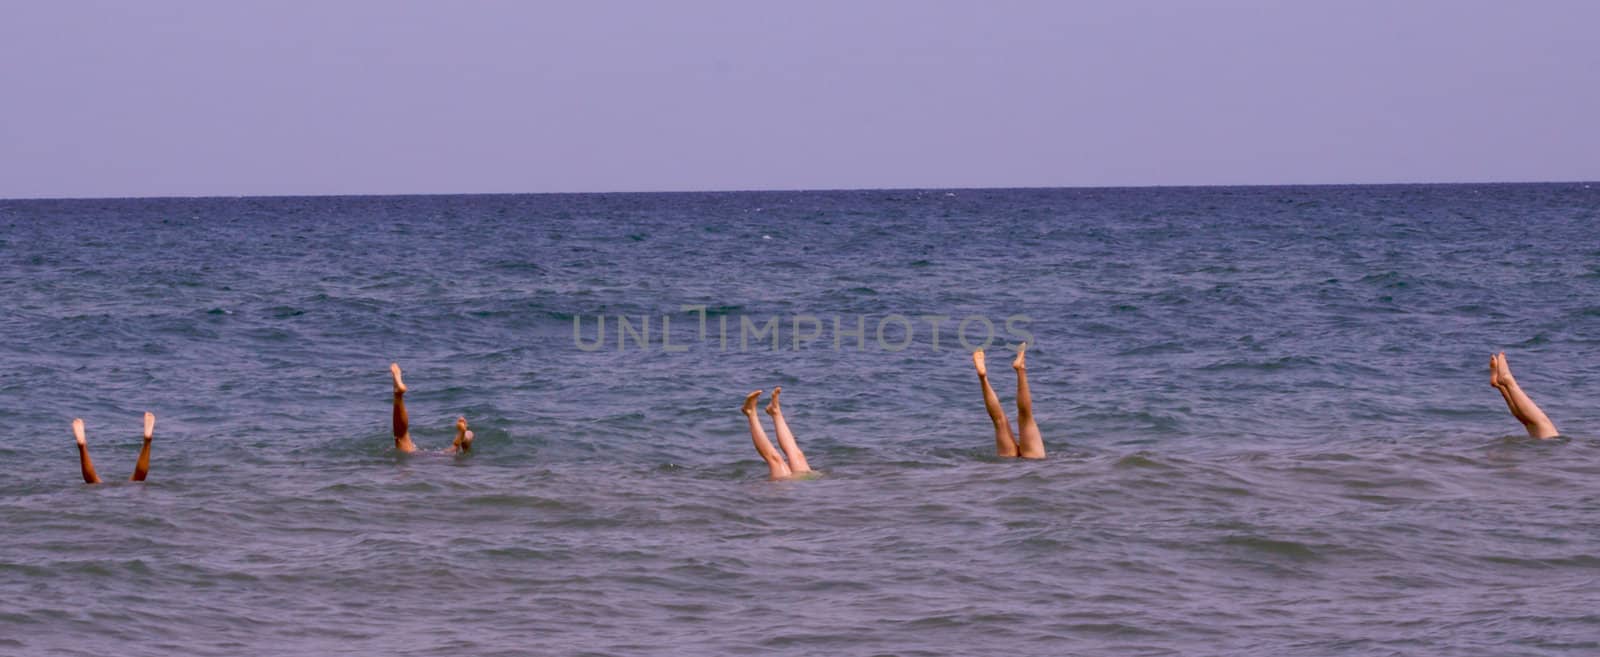 five girls doing attempted handstand on a sandbar in lake michigan